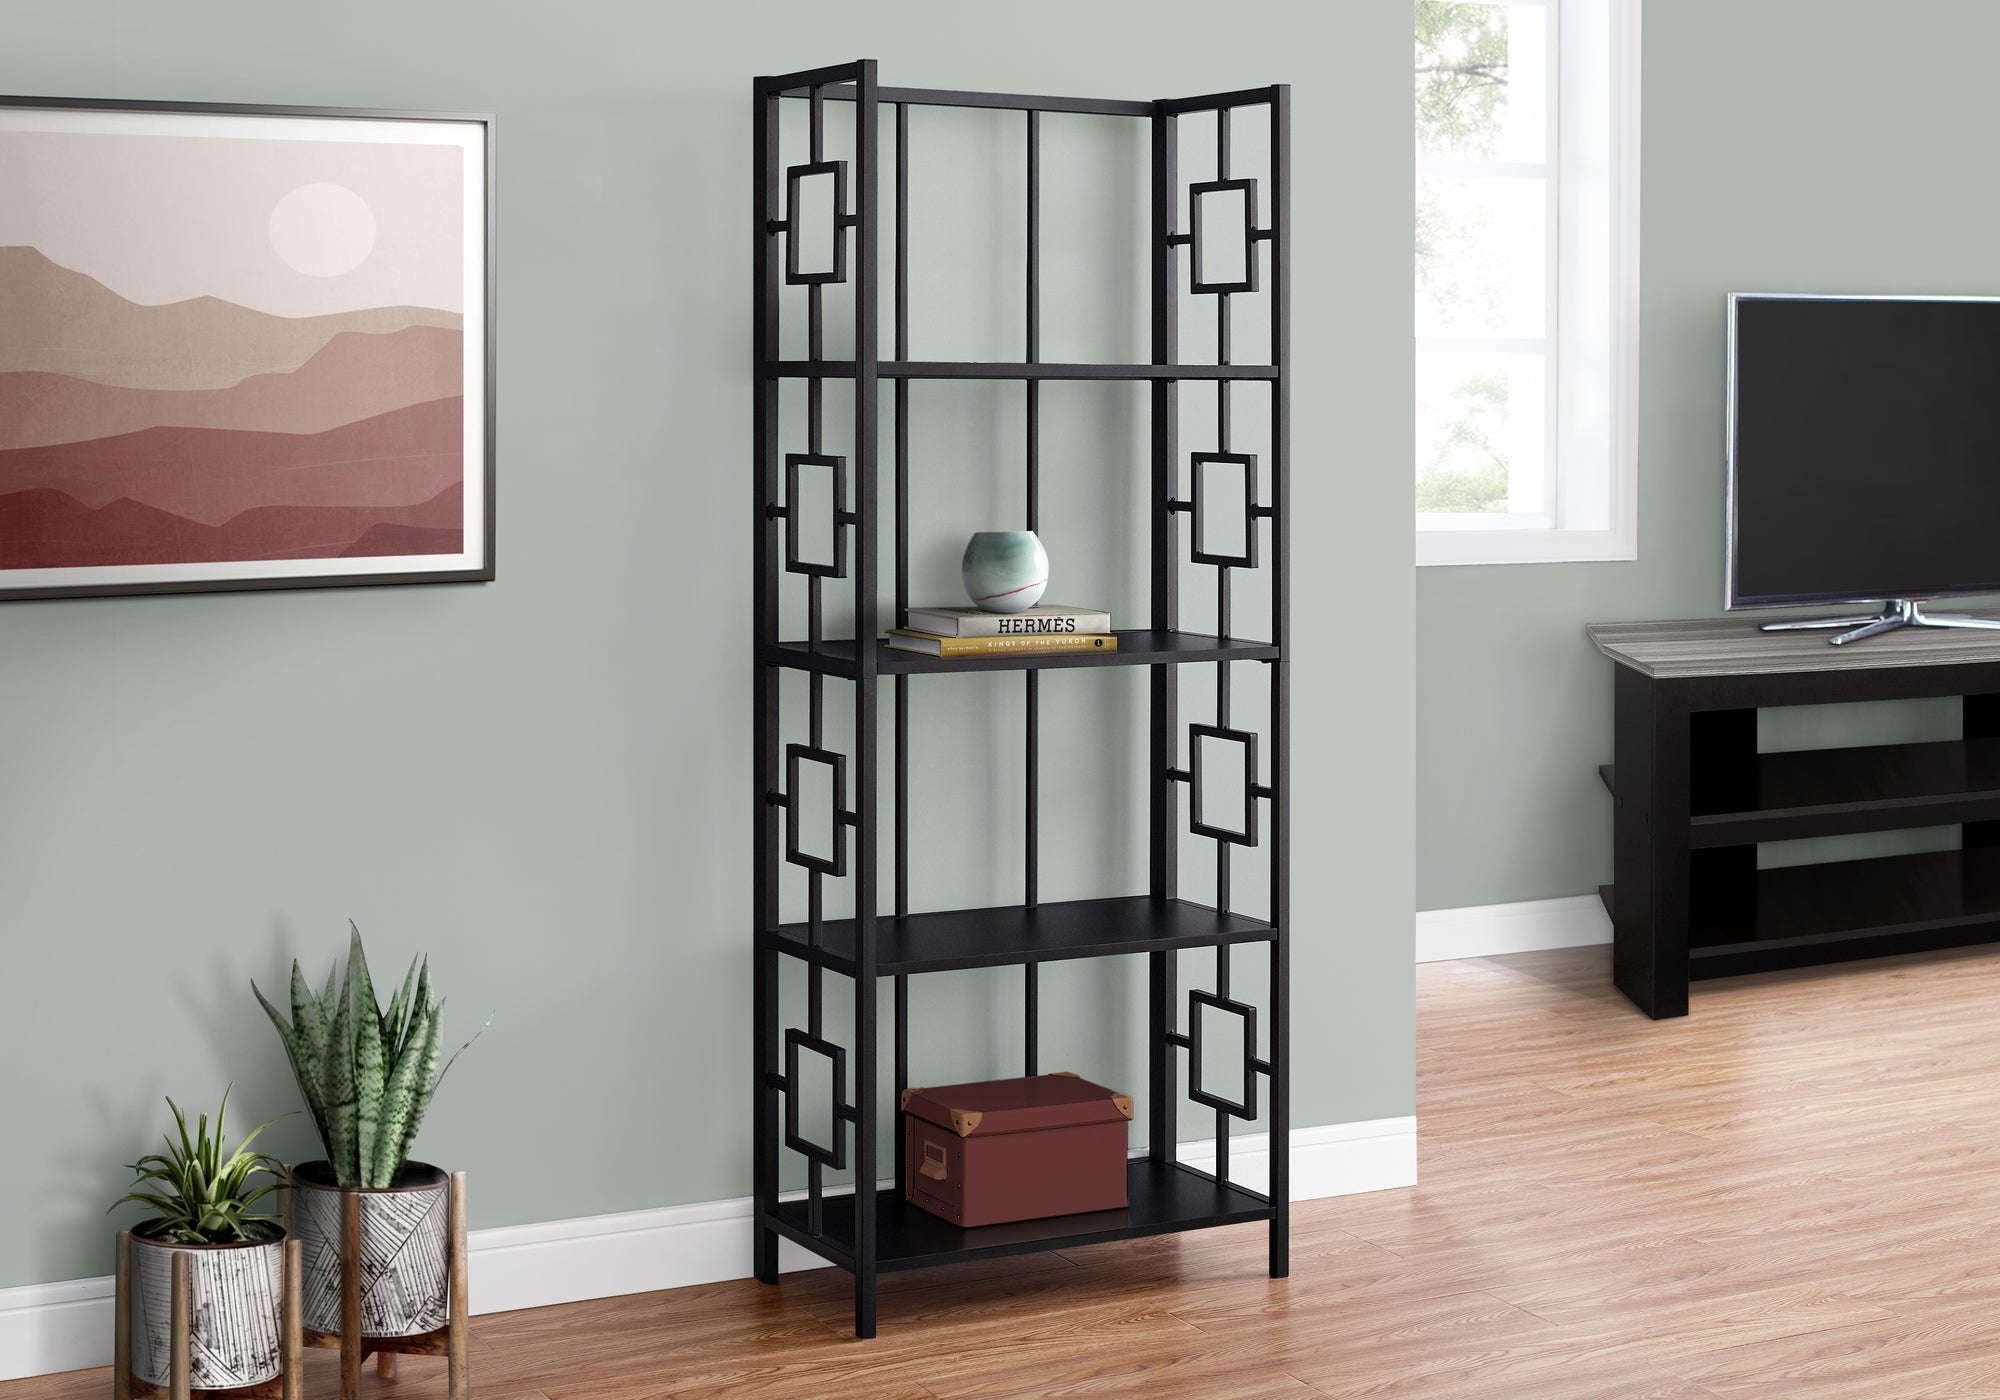 I 3615 - BOOKCASE - 62"H / BLACK / BLACK METAL ETAGERE BY MONARCH SPECIALTIES INC